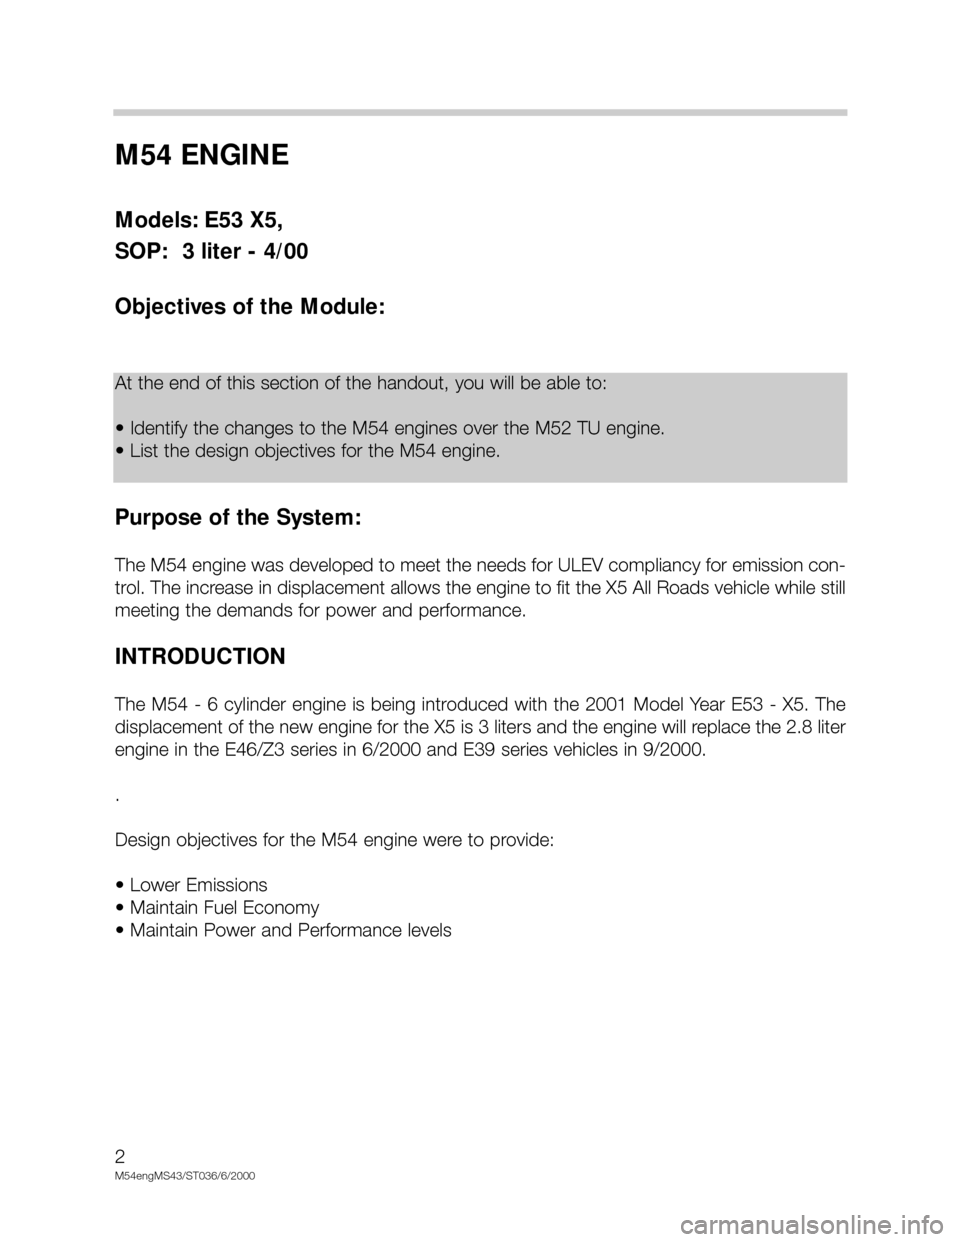 BMW X5 2001 E53 M54 Engine Workshop Manual M54 ENGINE 
Models: E53 X5, 
SOP:  3 liter - 4/00
Objectives of the Module:
Purpose of the System:
The M54 engine was developed to meet the needs for ULEV compliancy for emission con-
trol. The increa